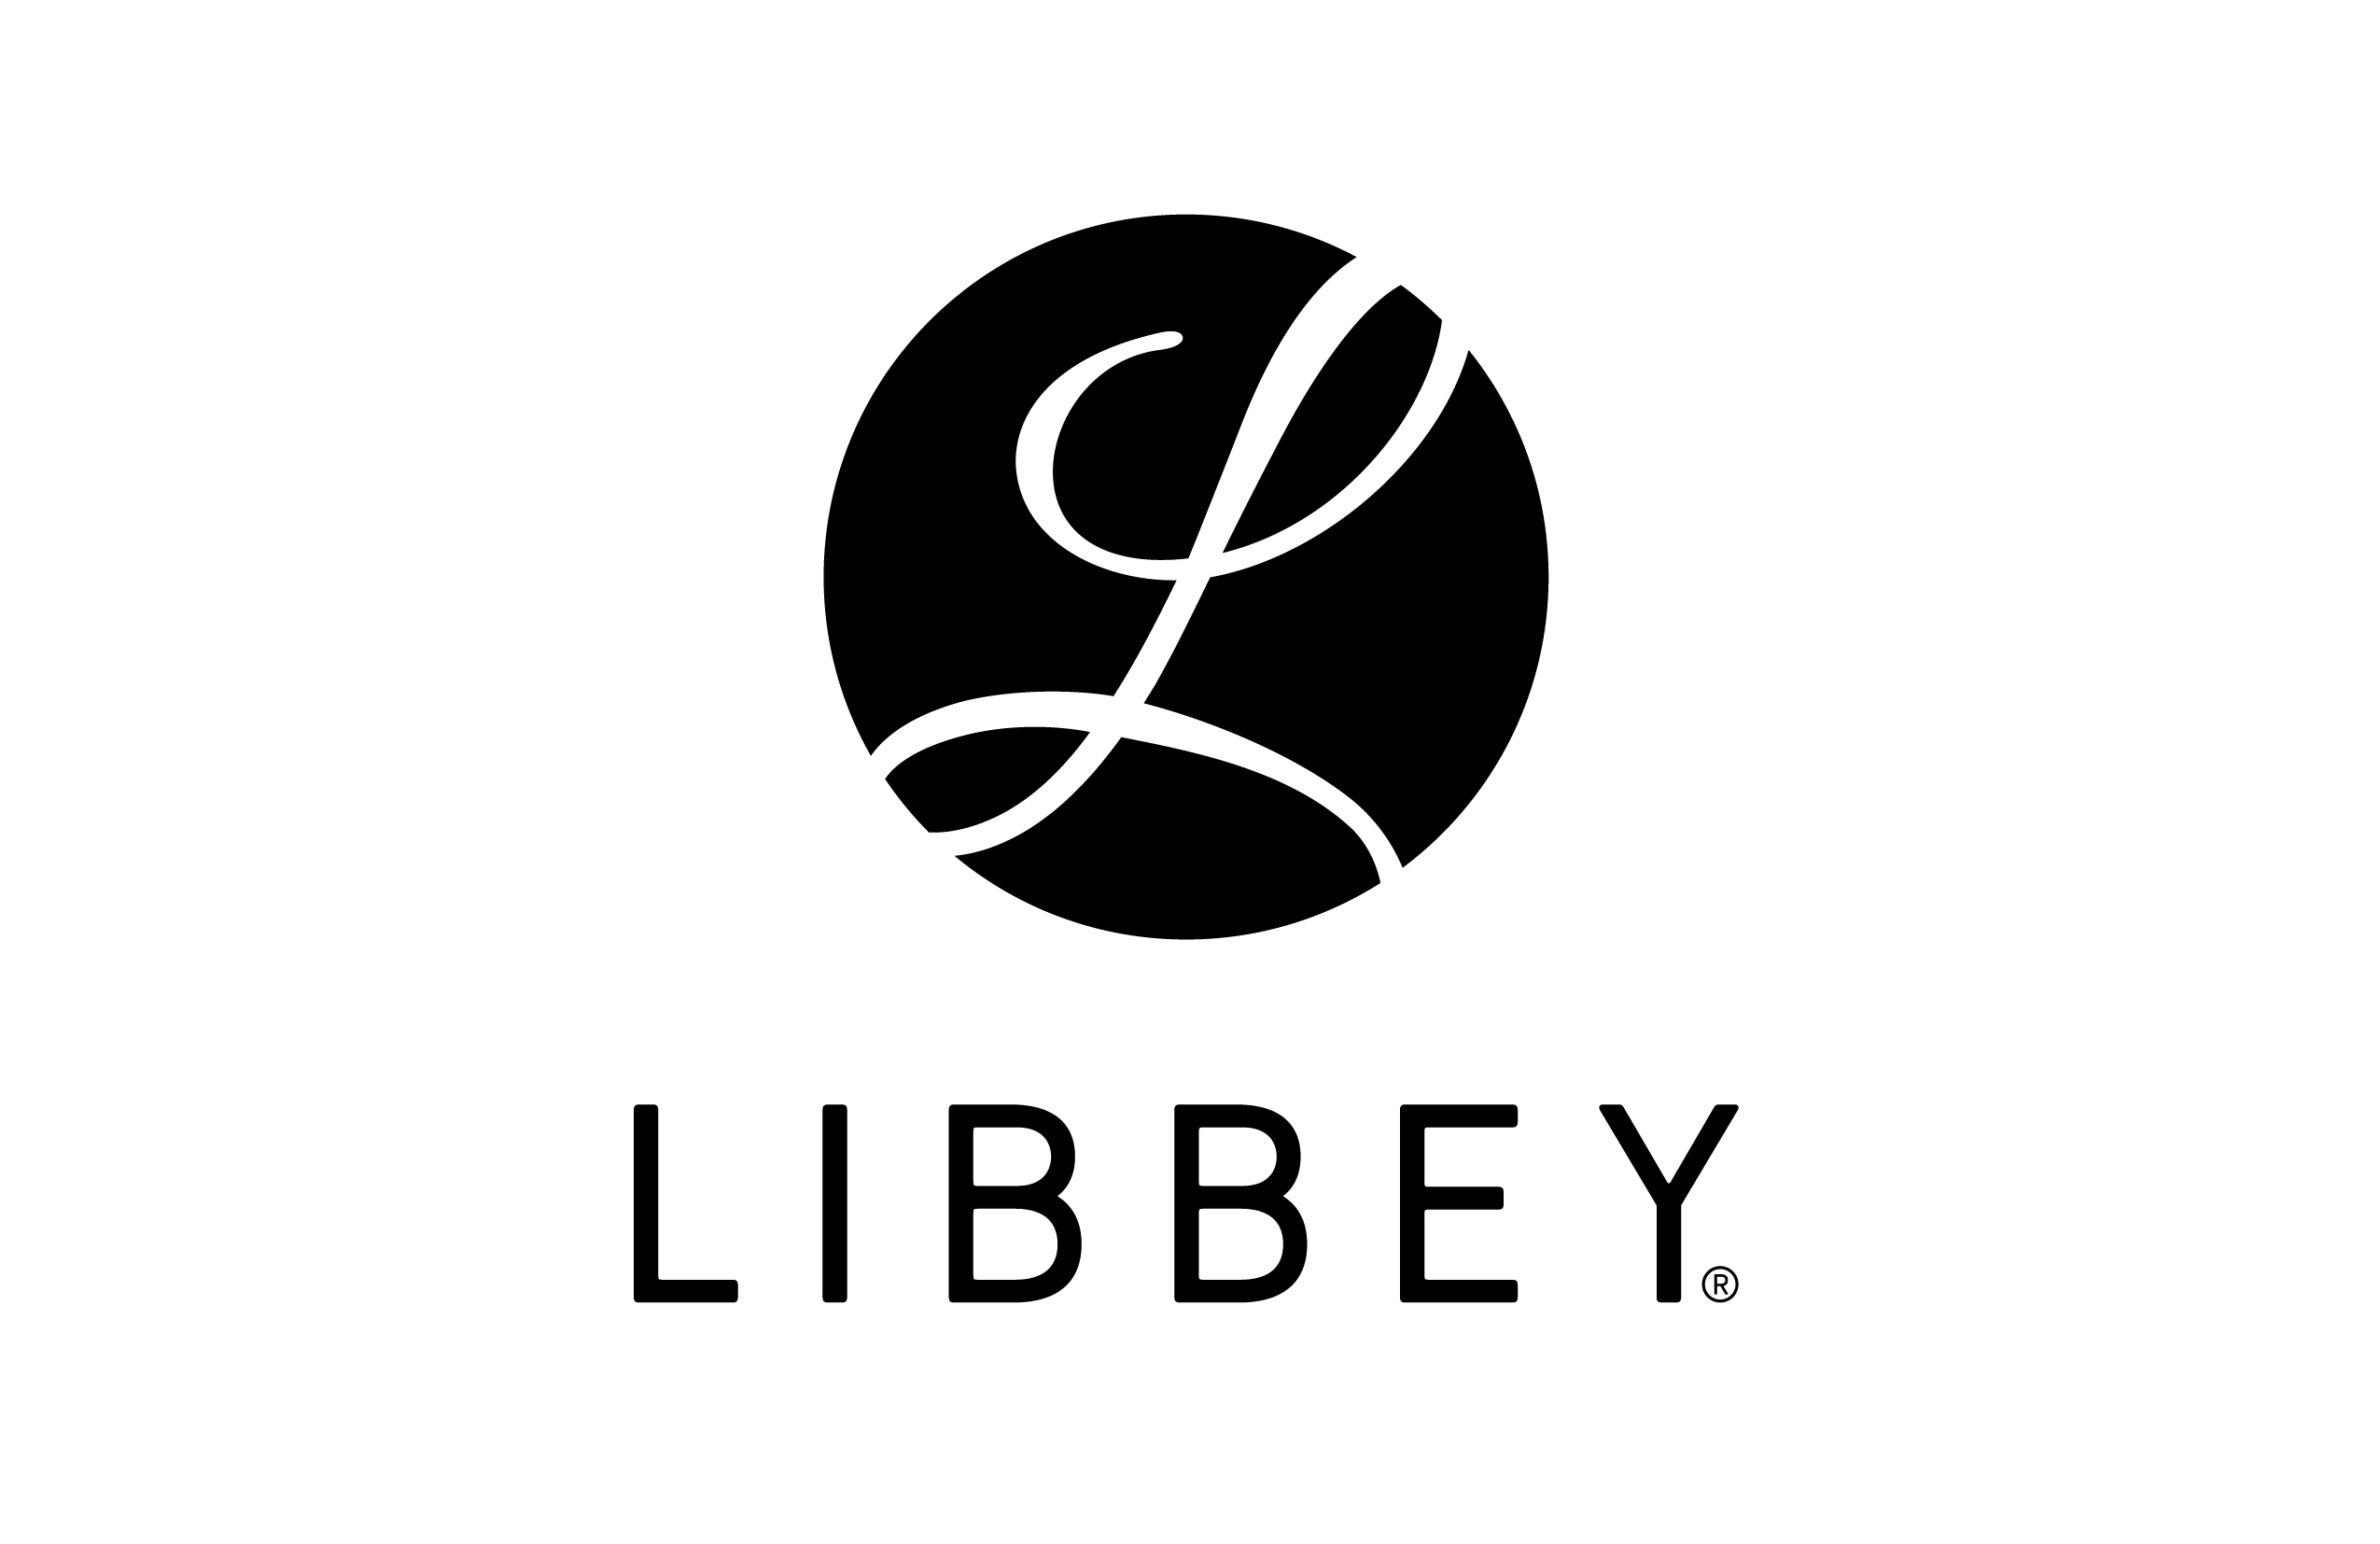 Libbey Inc. Announces 4th Quarter and Year-End 2016 Financial Results